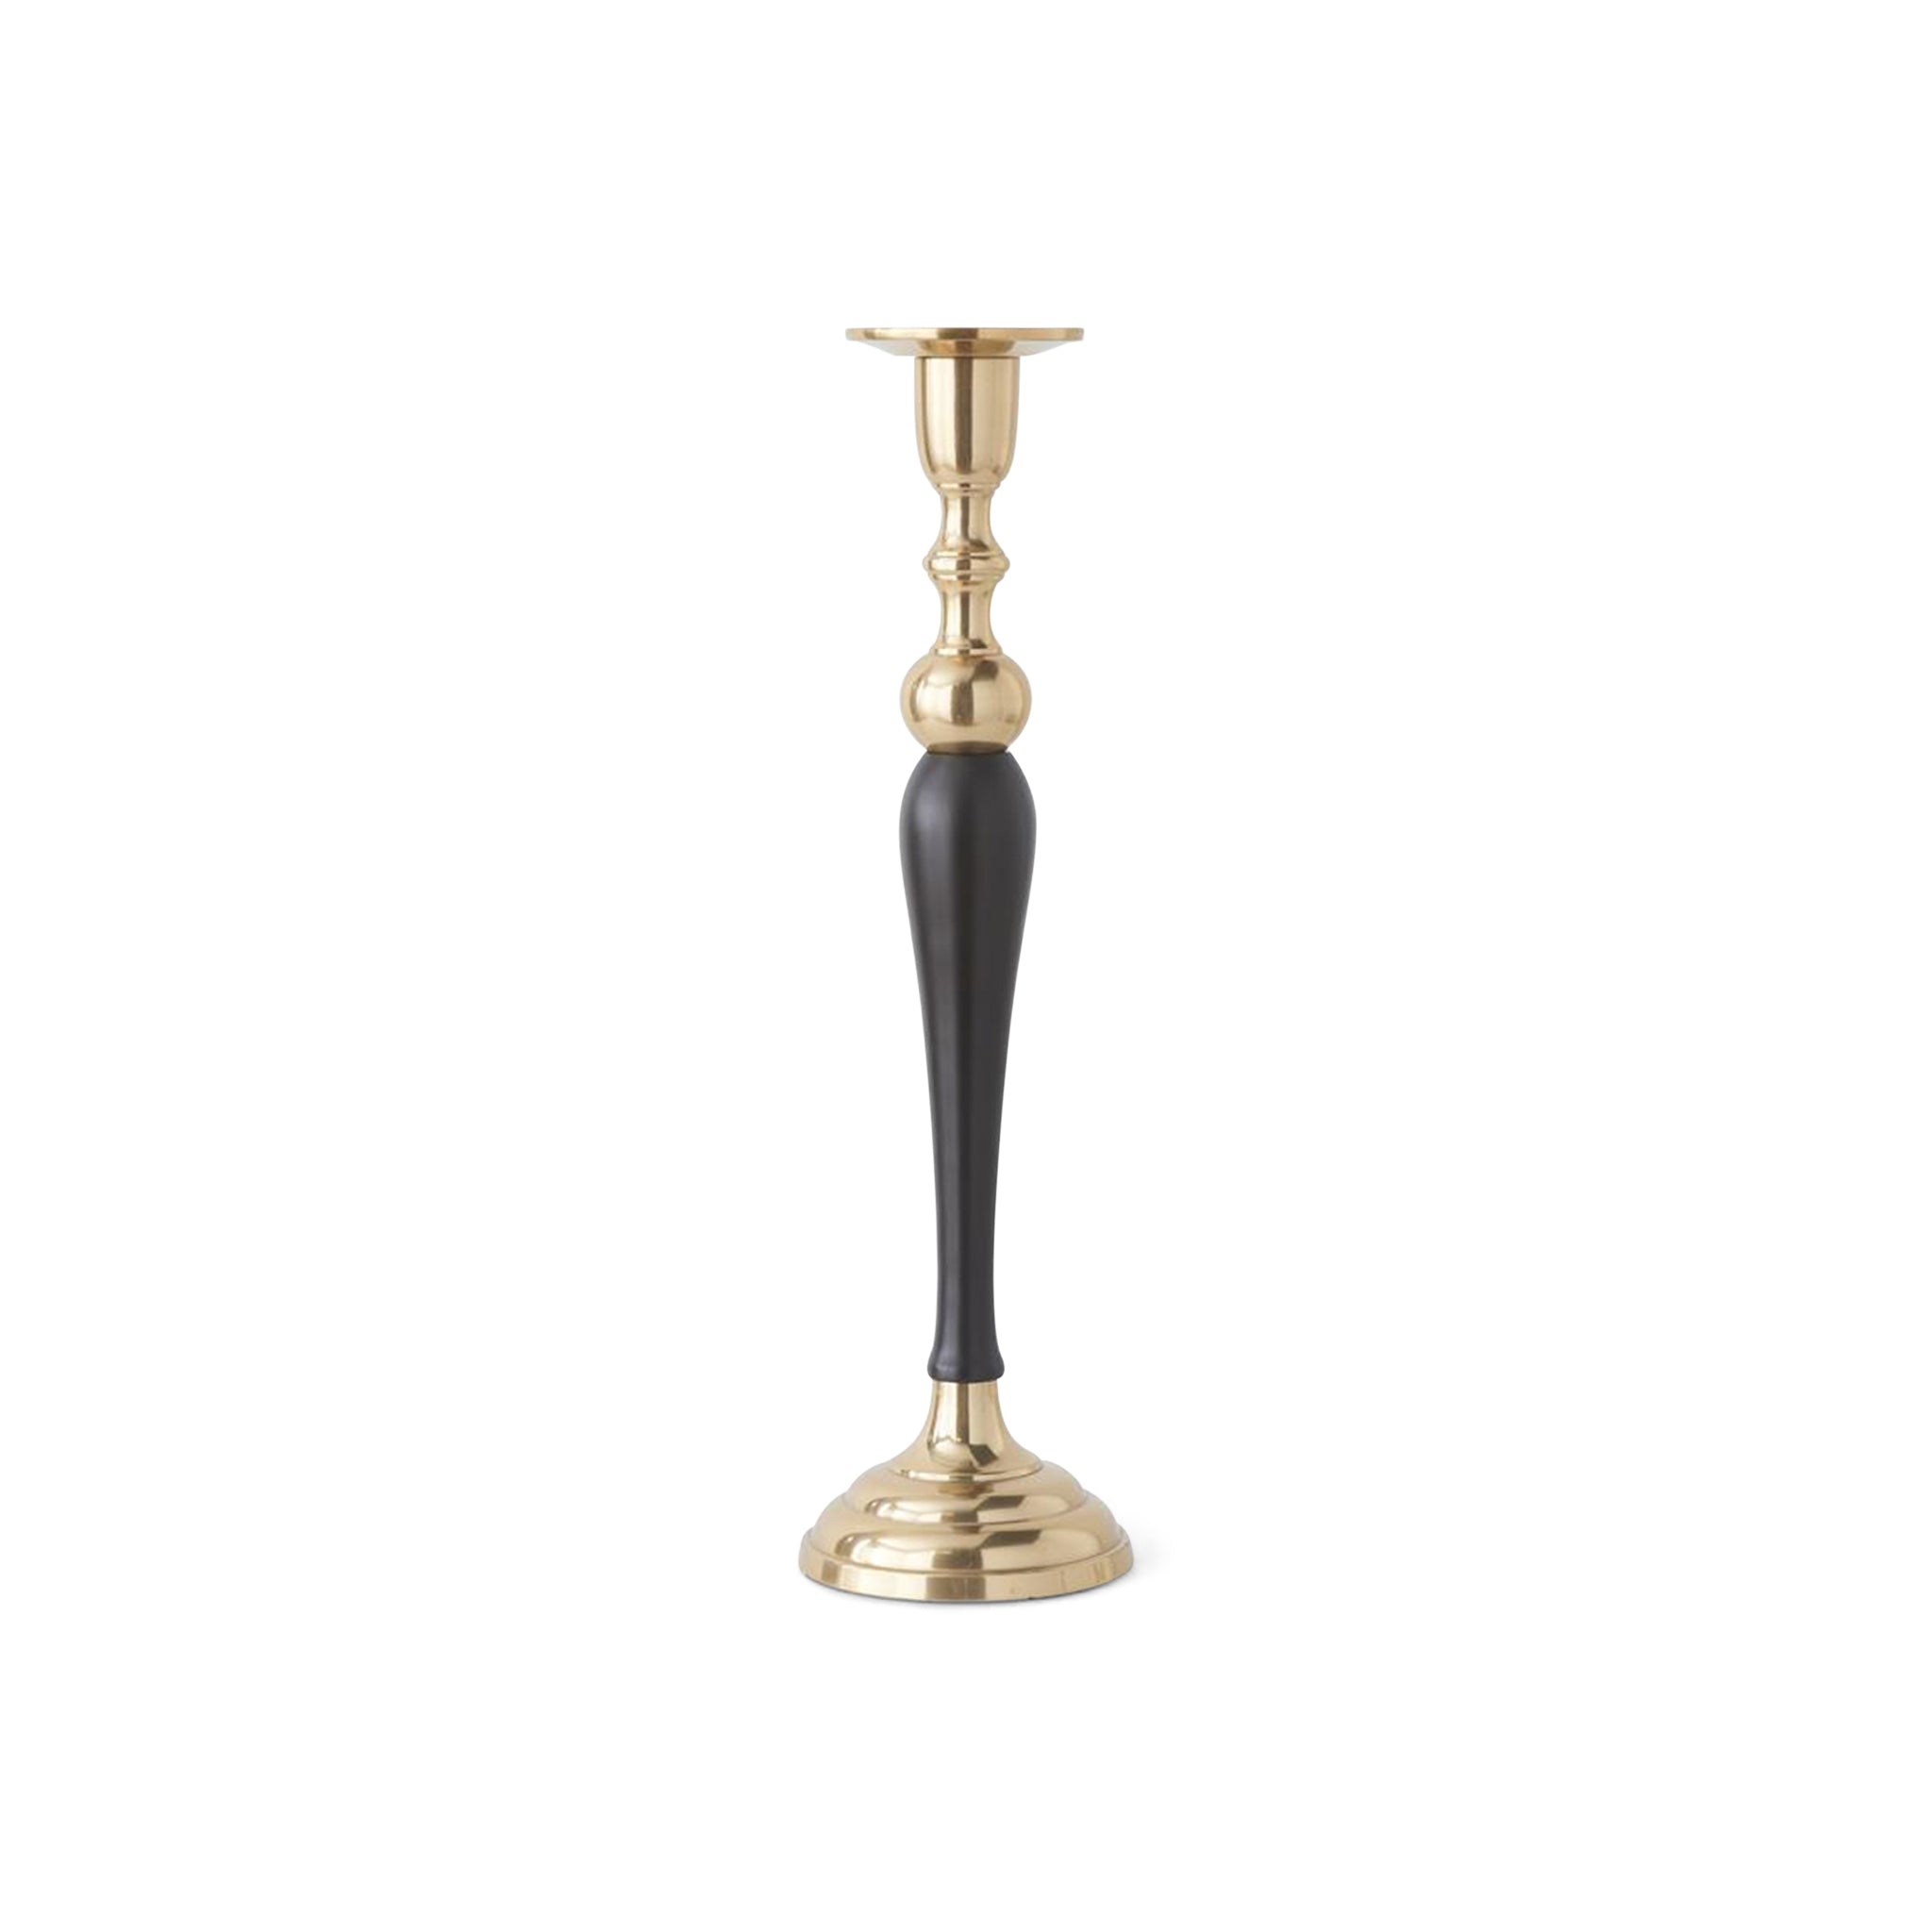 Sturgis Candlestick Collection